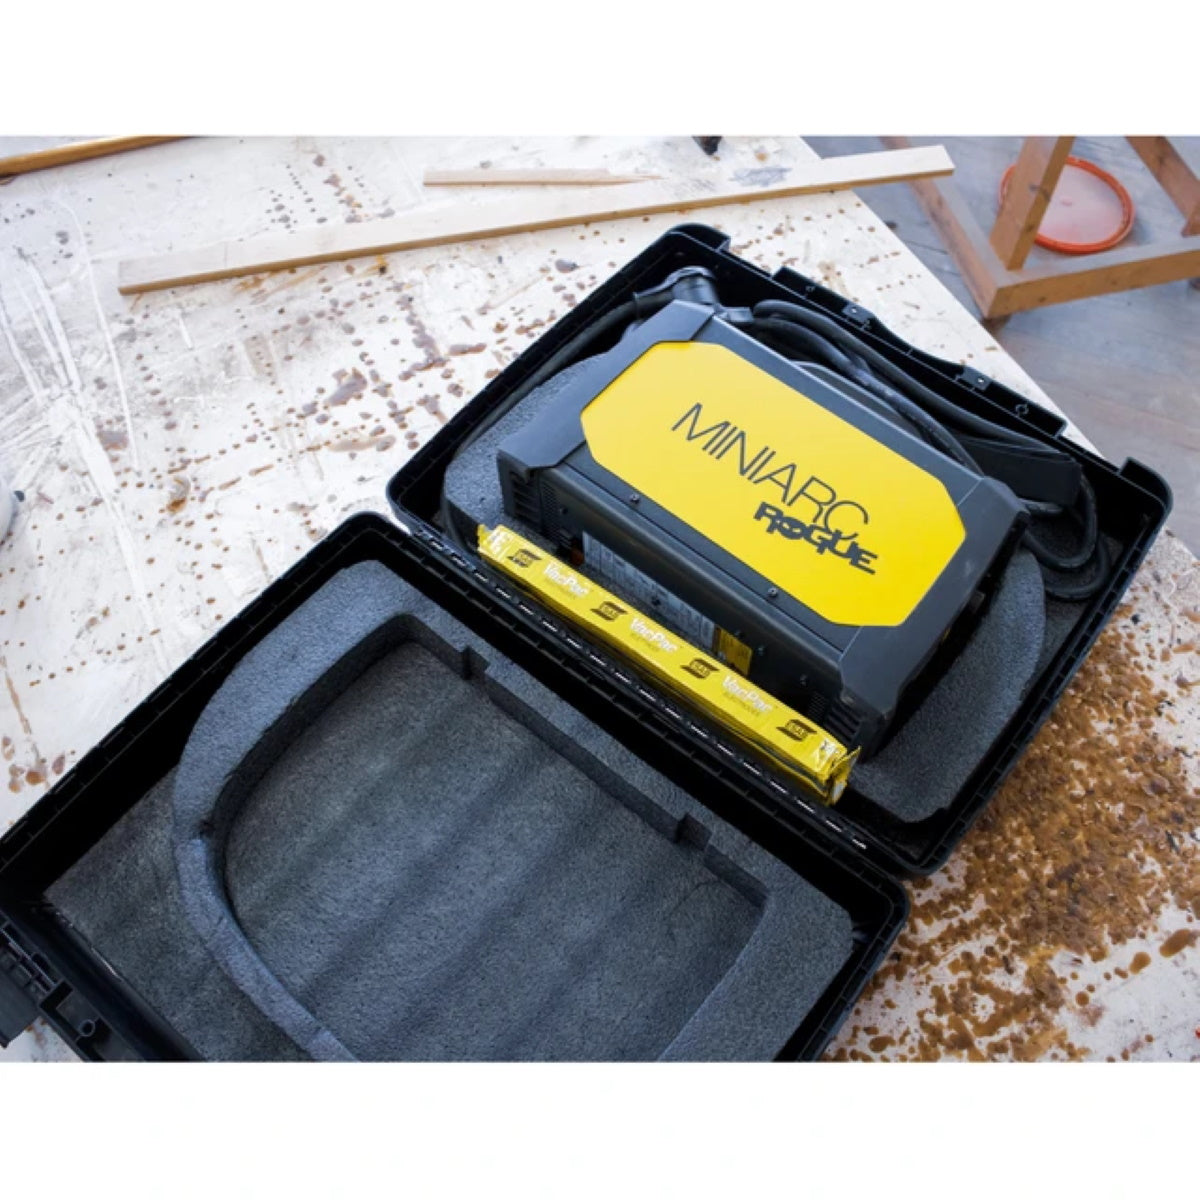 ESAB Rogue 130/180 Plastic Carrying Case (0700500085)